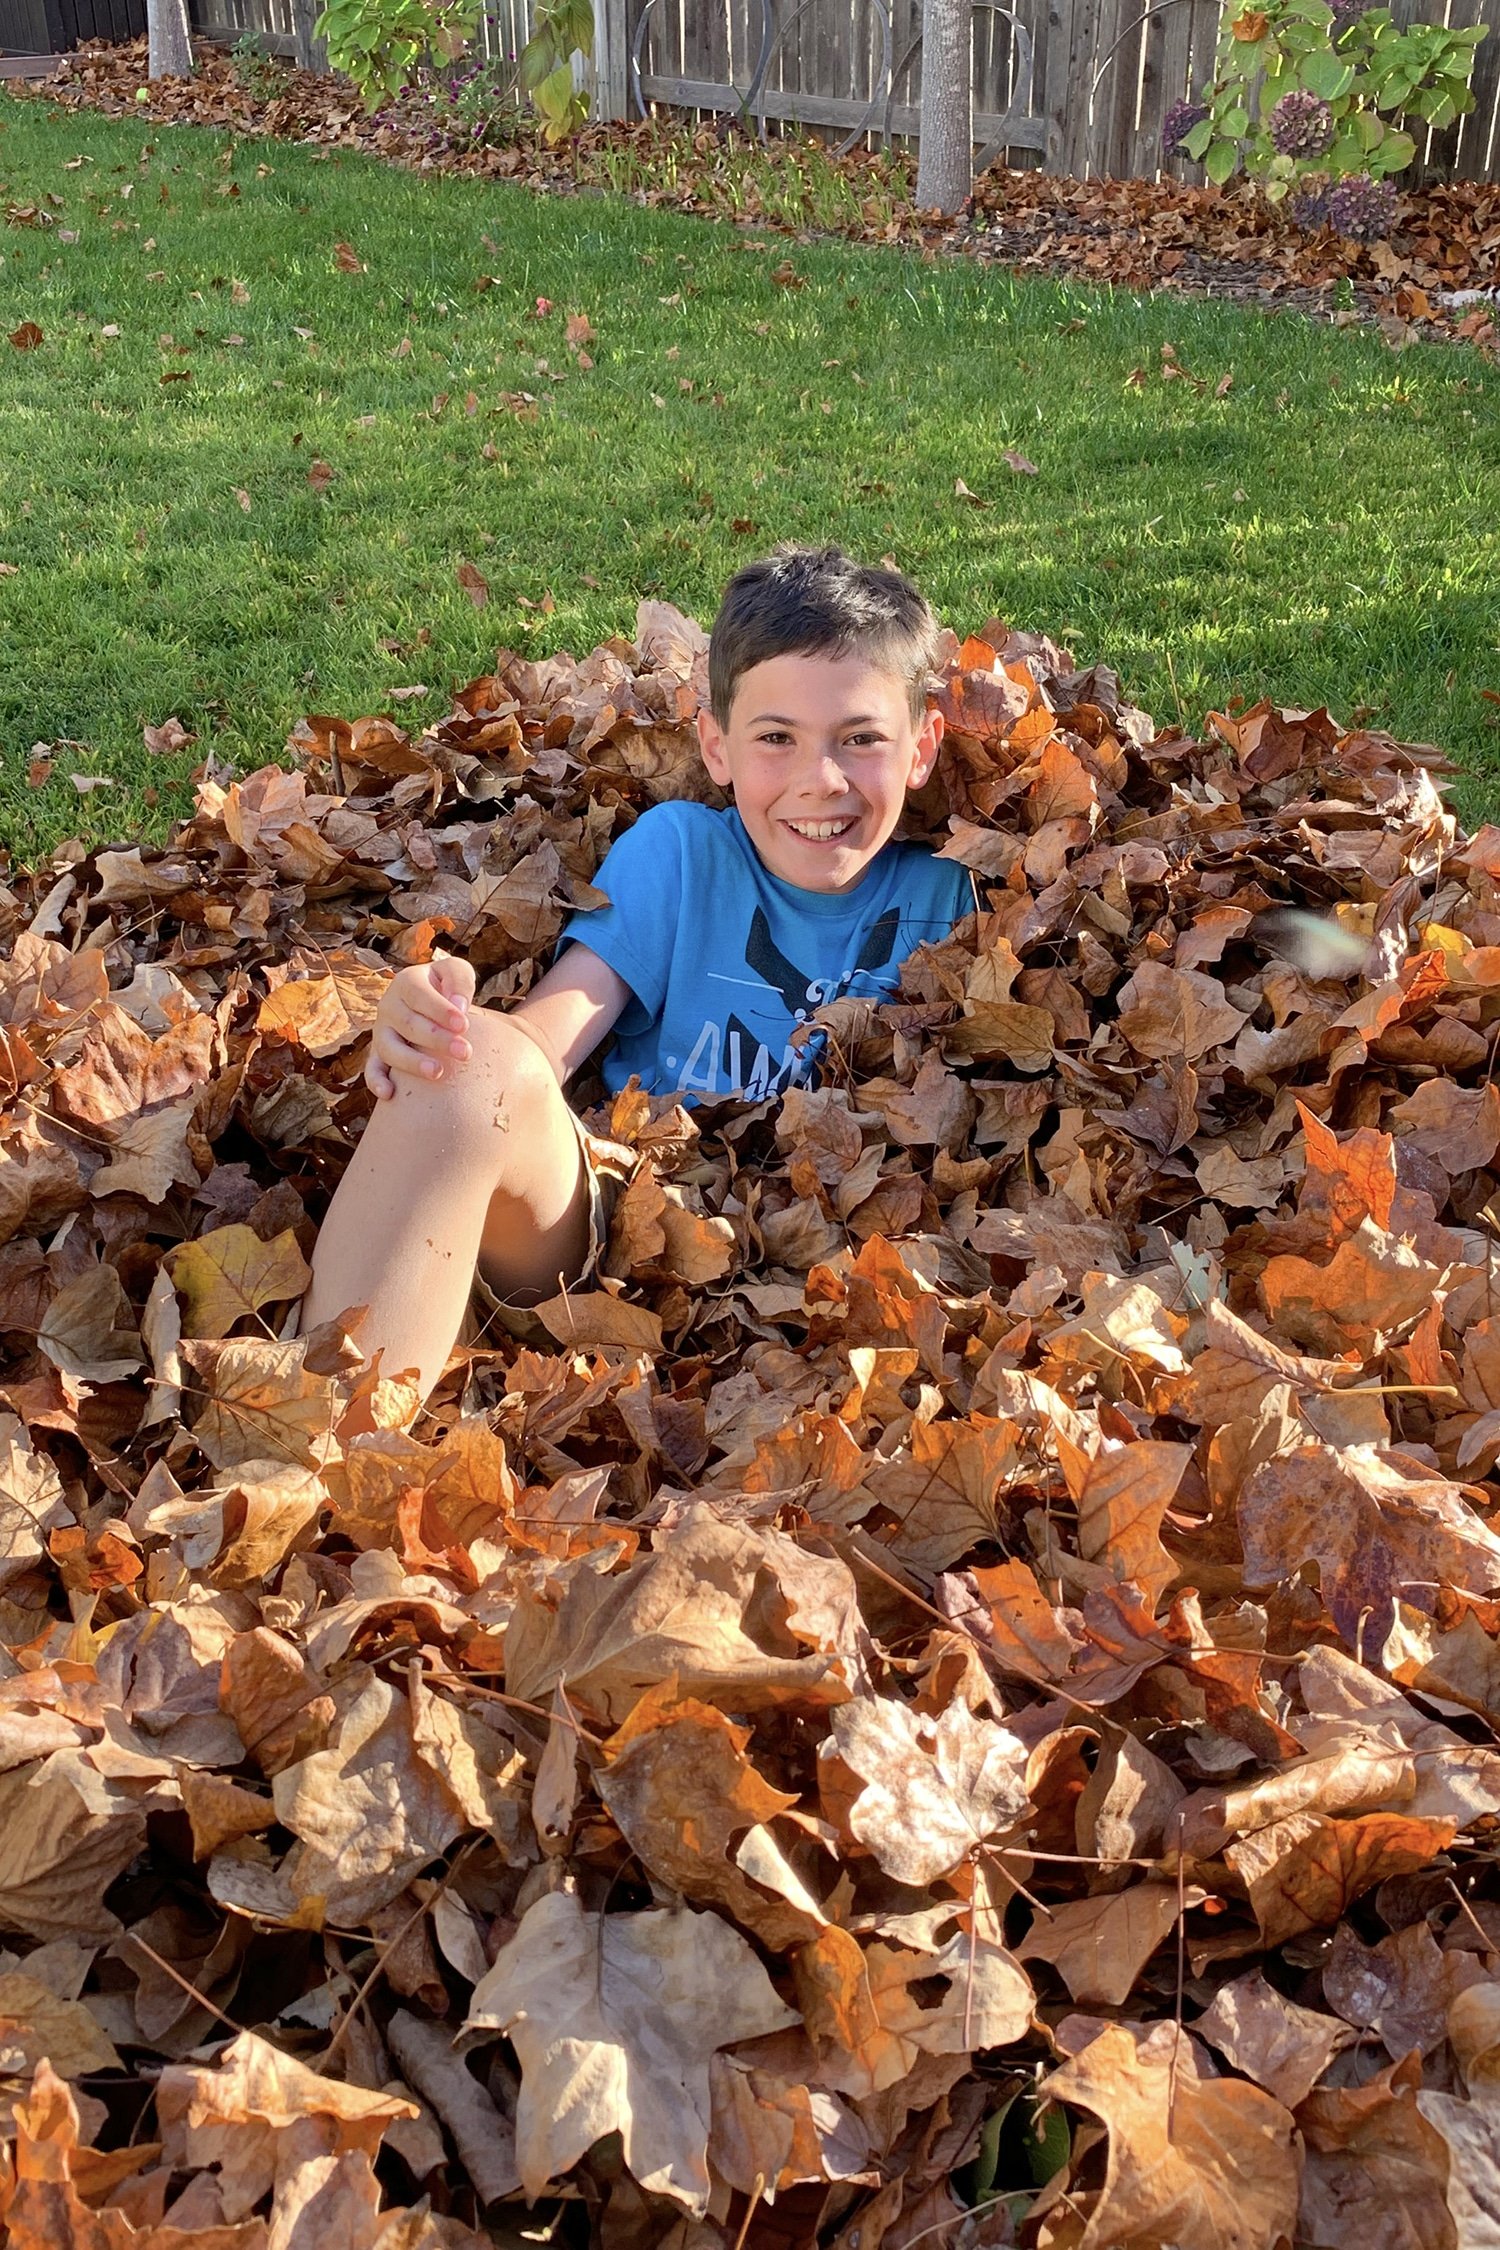 child smiling in pile of fallen leaves